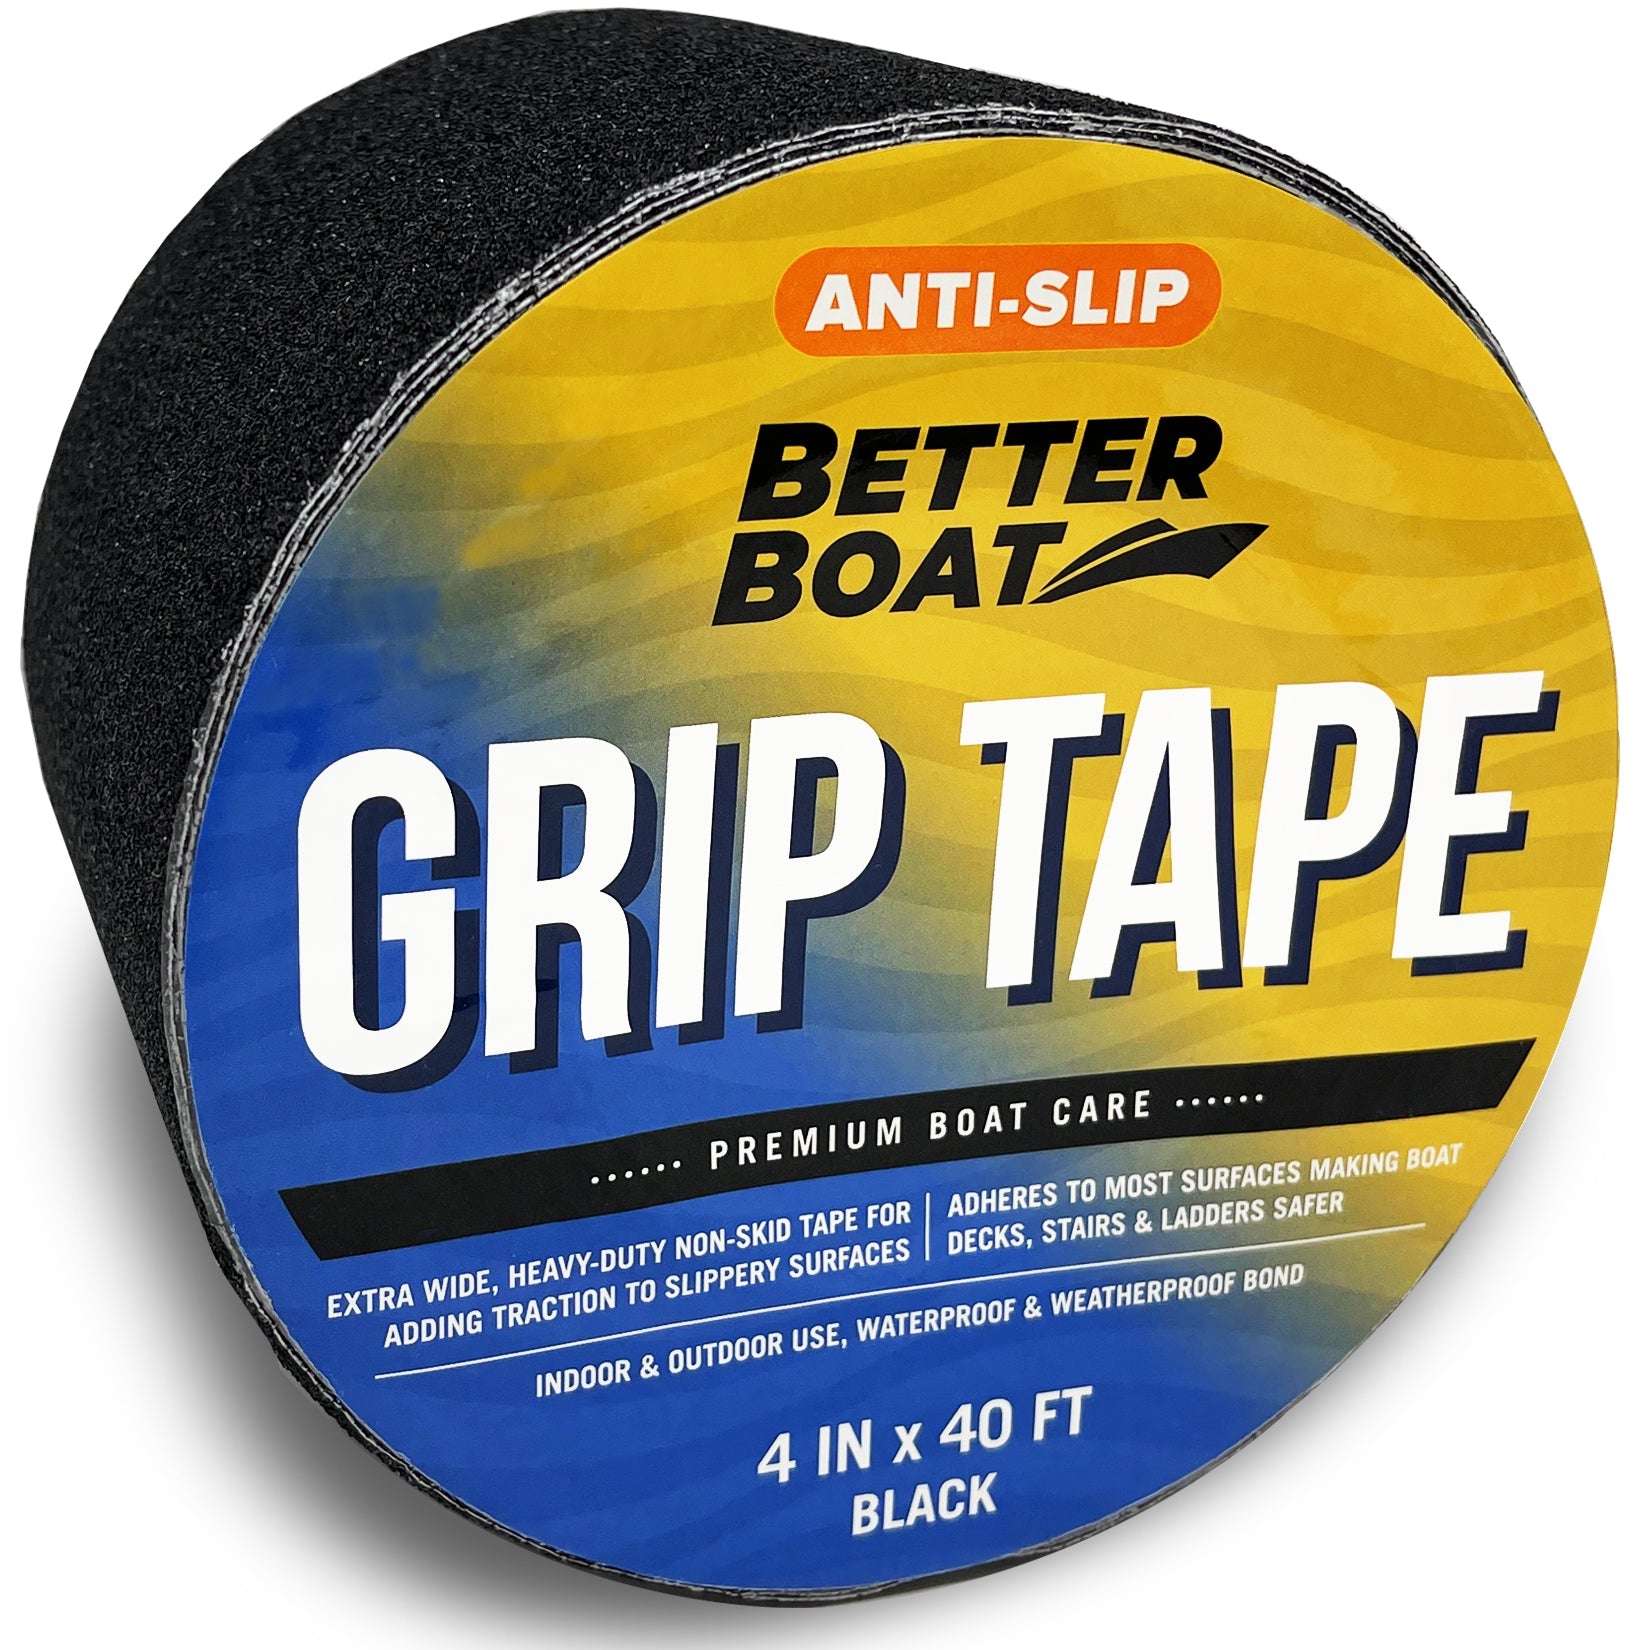 Buy Non-Skid Pads for Boats & Marine Non-Skid Tape - Anti-Skid